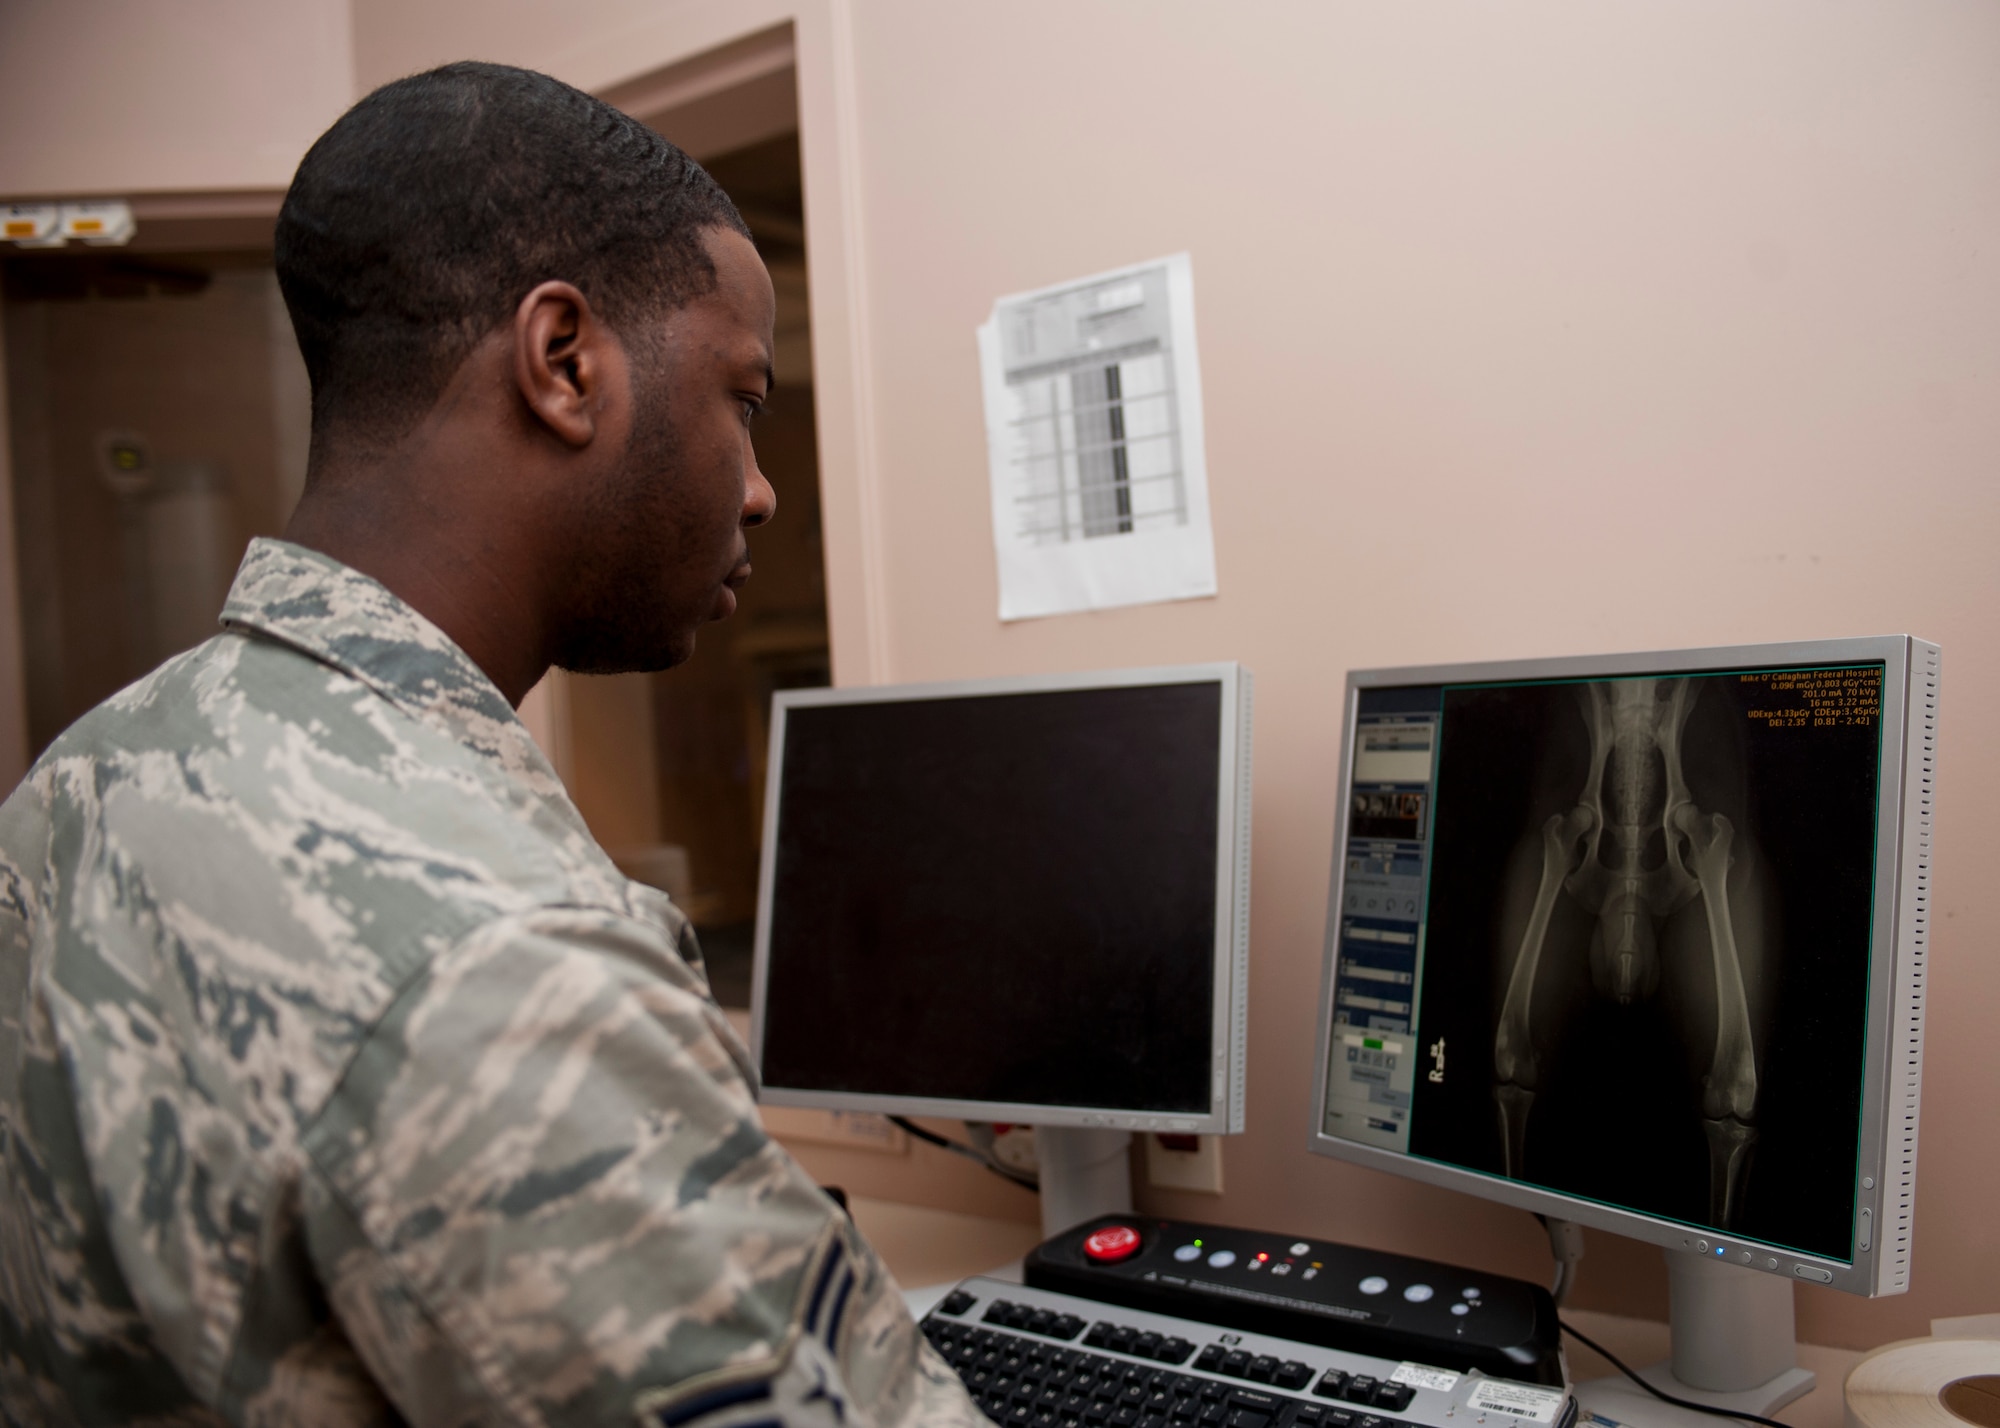 Airman 1st Class Devon Ross, 99th Medical Surgical Operations Squadron technician, looks over an X-ray of a military working dog at Nellis Air Force Base, Nev., May 1, 2015. On average, the Diagnostic Imaging Clinic sees 60,000 patients a year and more than 150 patients a day. (U.S. Air Force photo by Airman 1st Class Jake Carter)